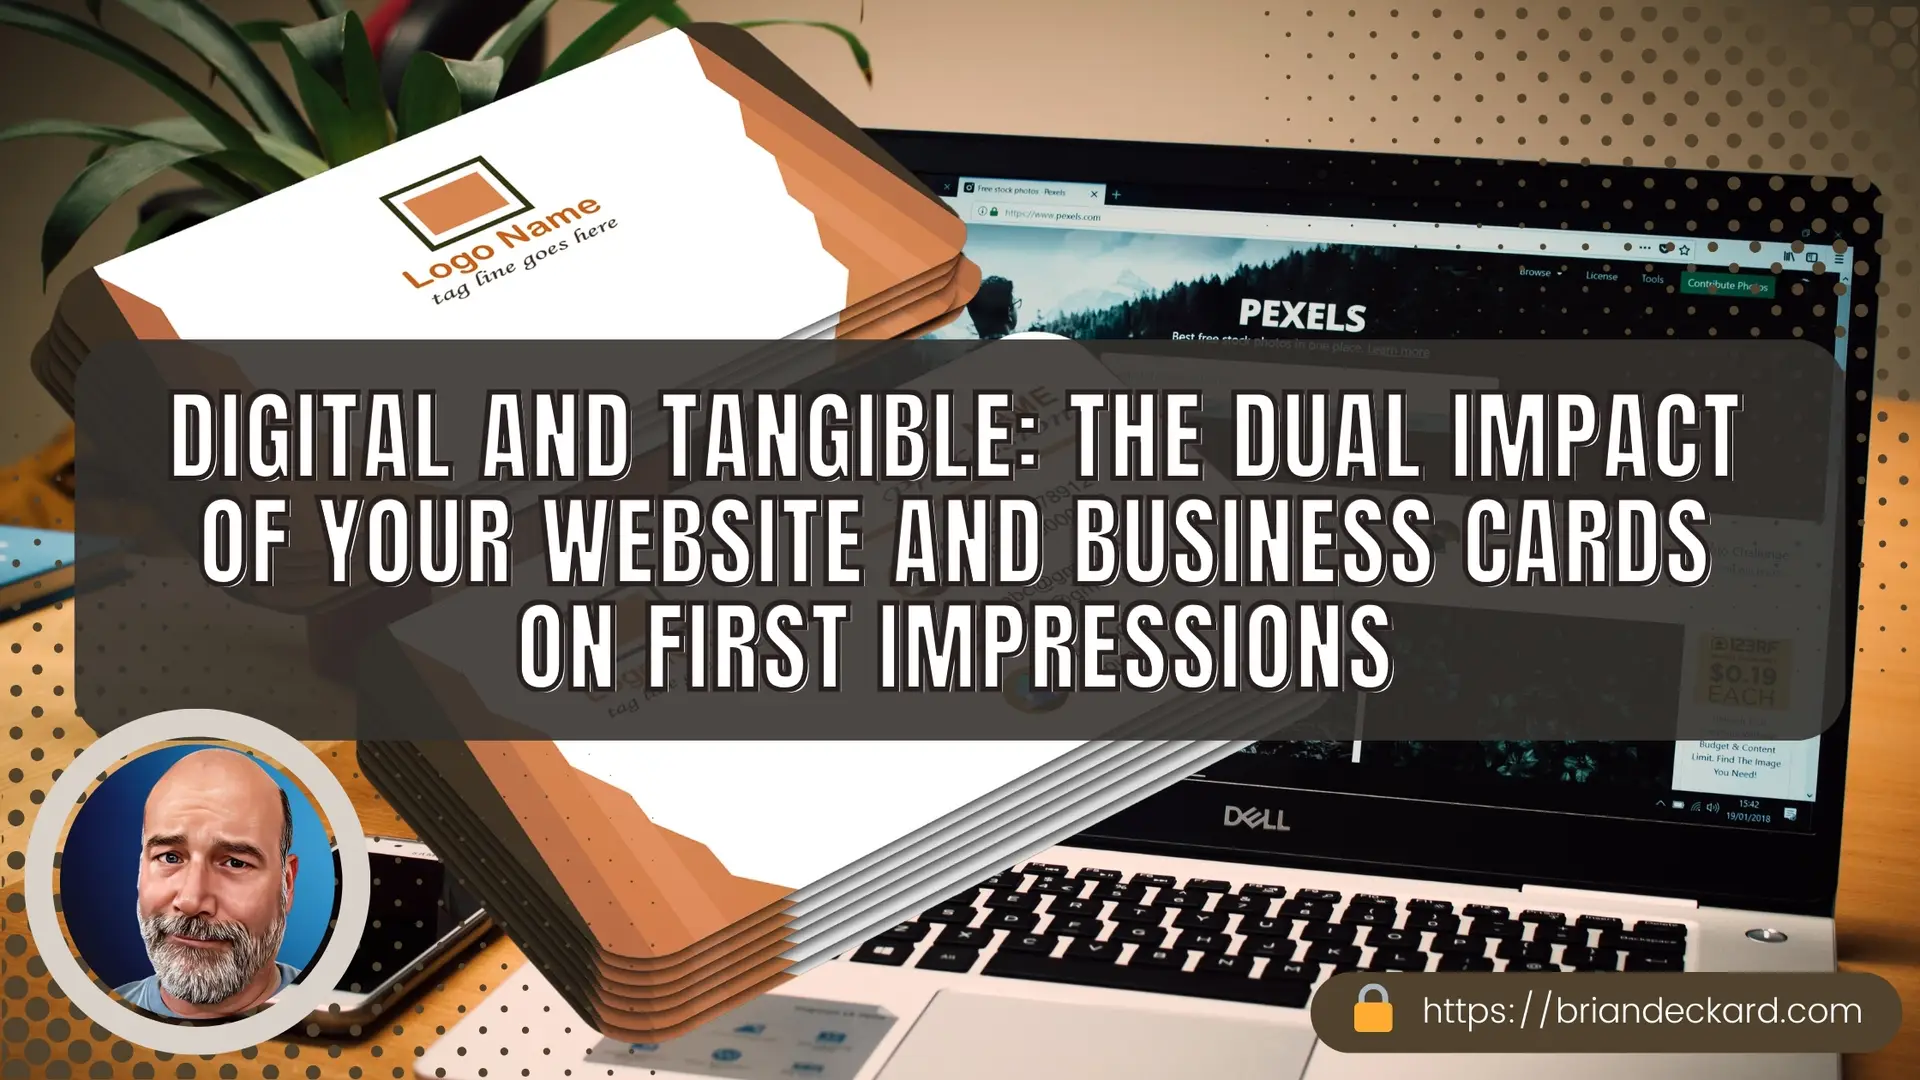 Digital and Tangible The Dual Impact of Your Website and Business Cards on First Impressions